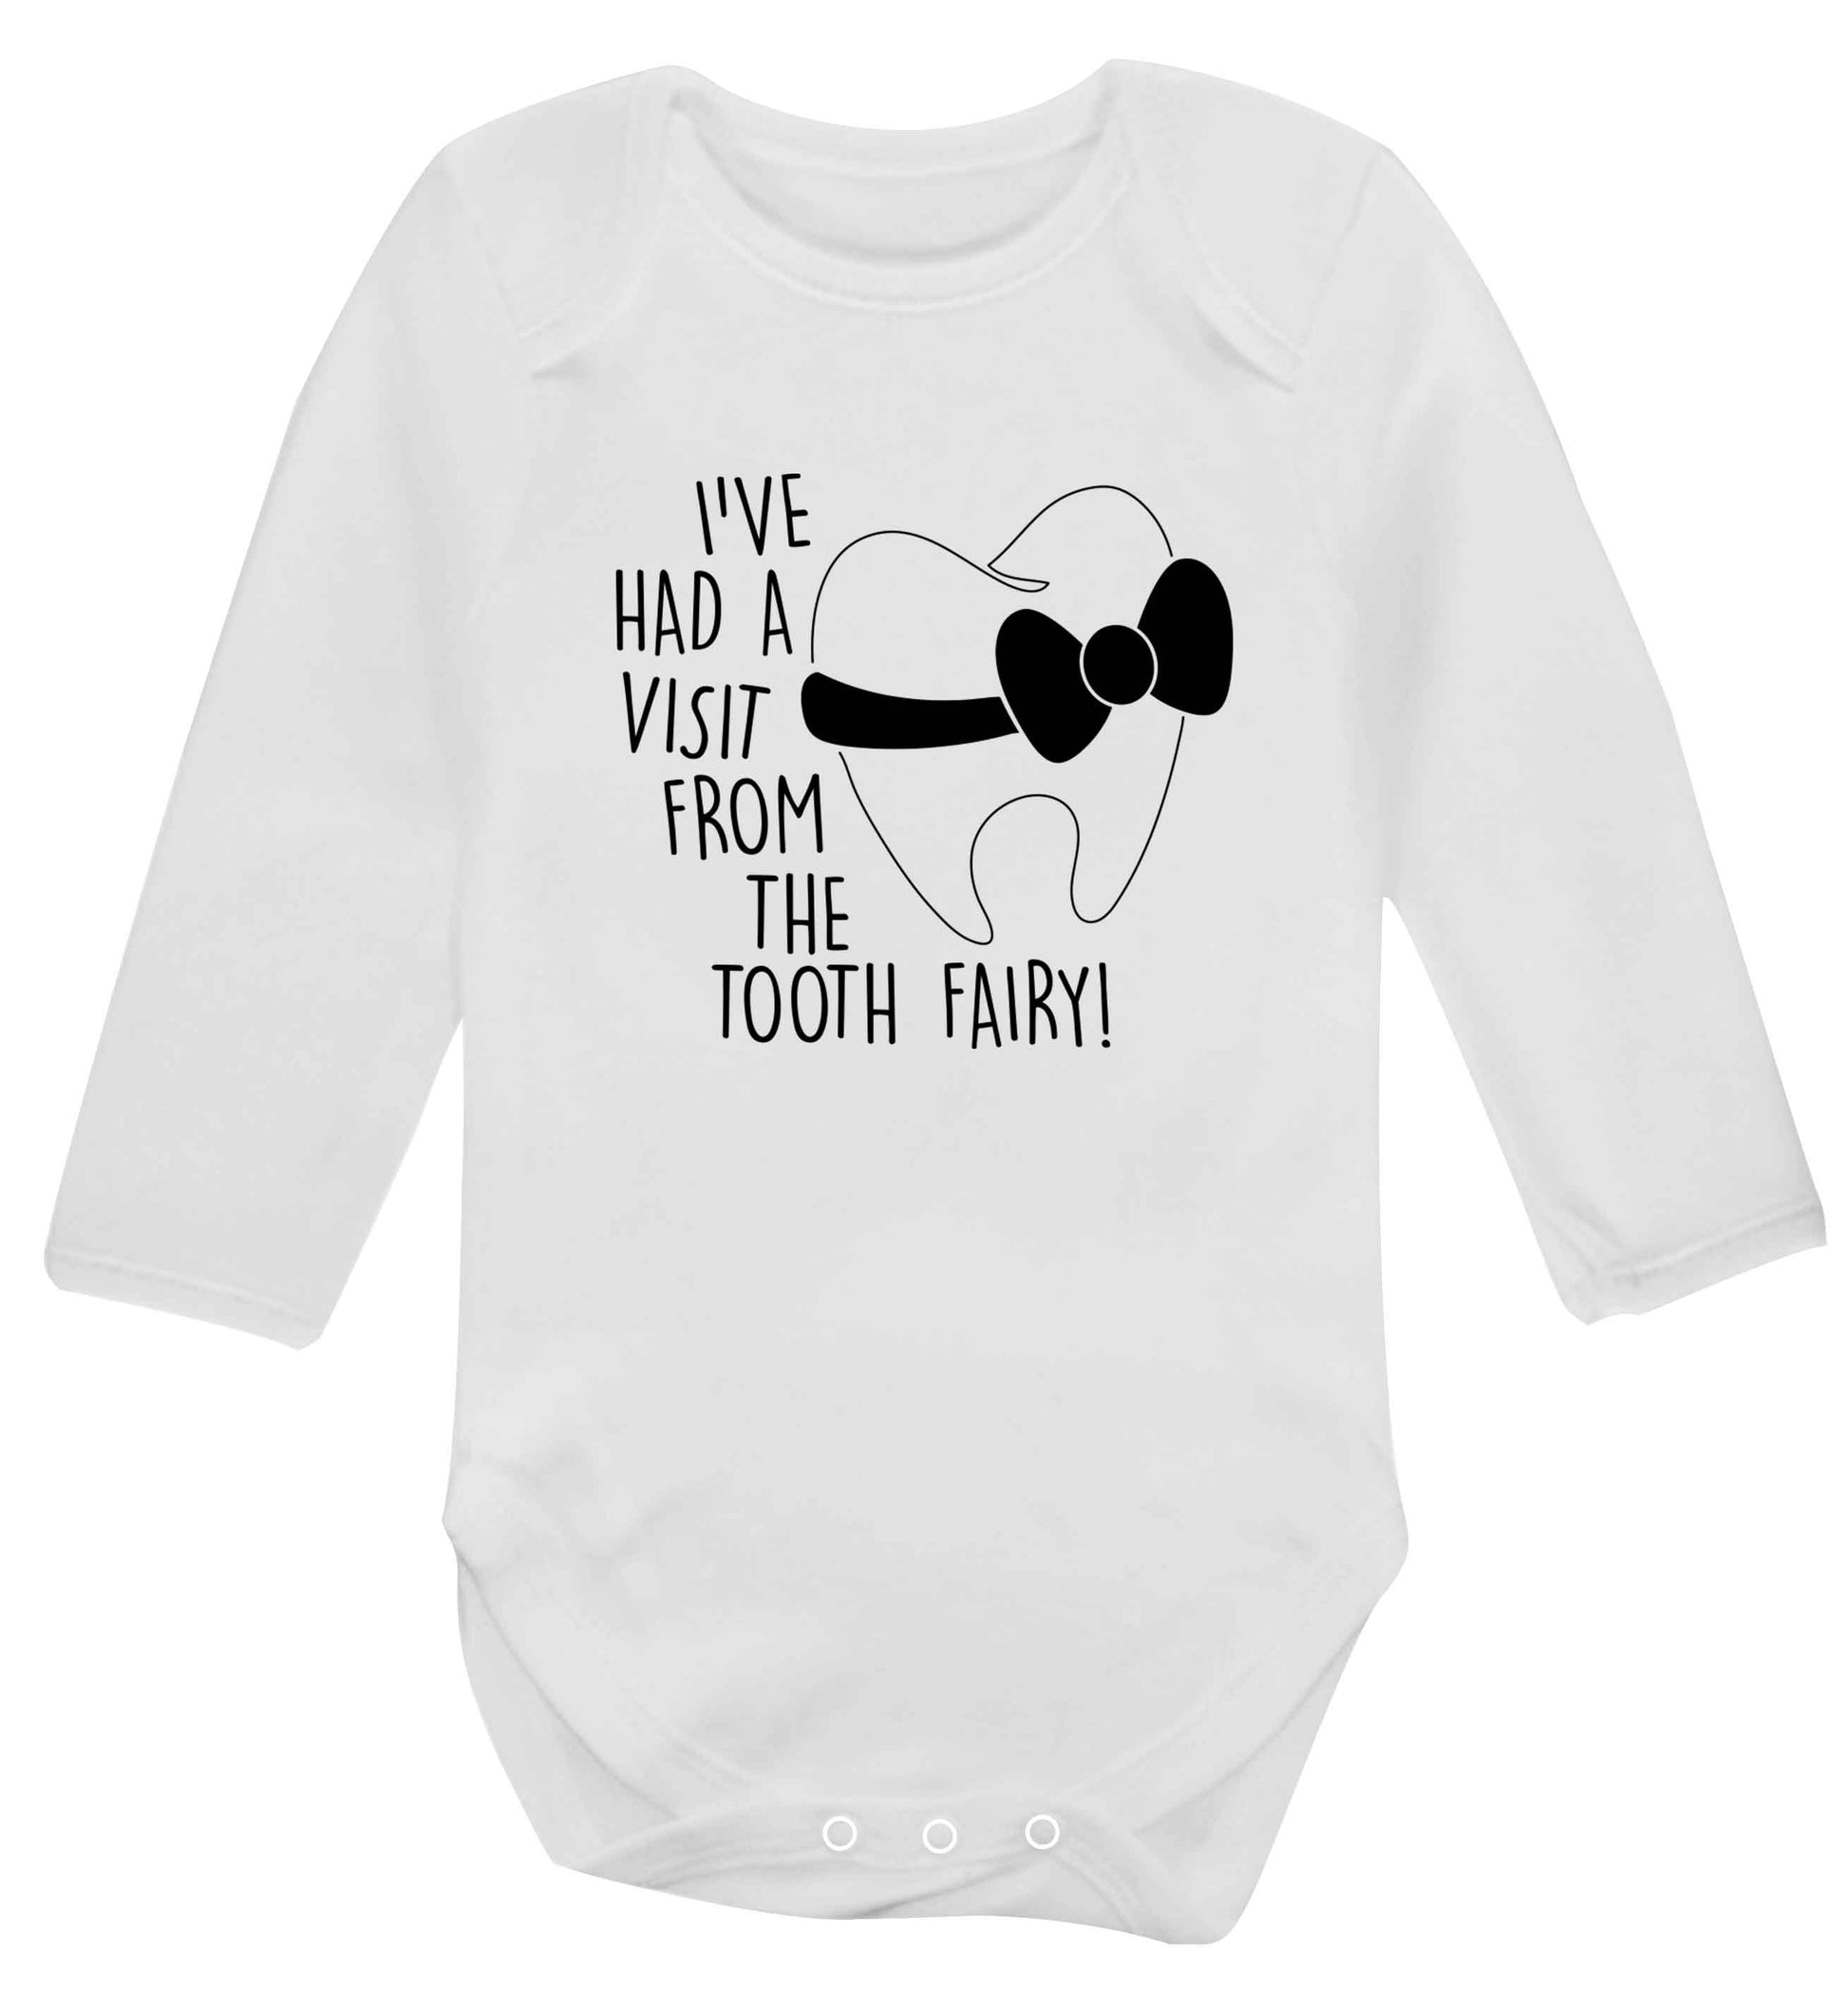 Visit From Tooth Fairy baby vest long sleeved white 6-12 months